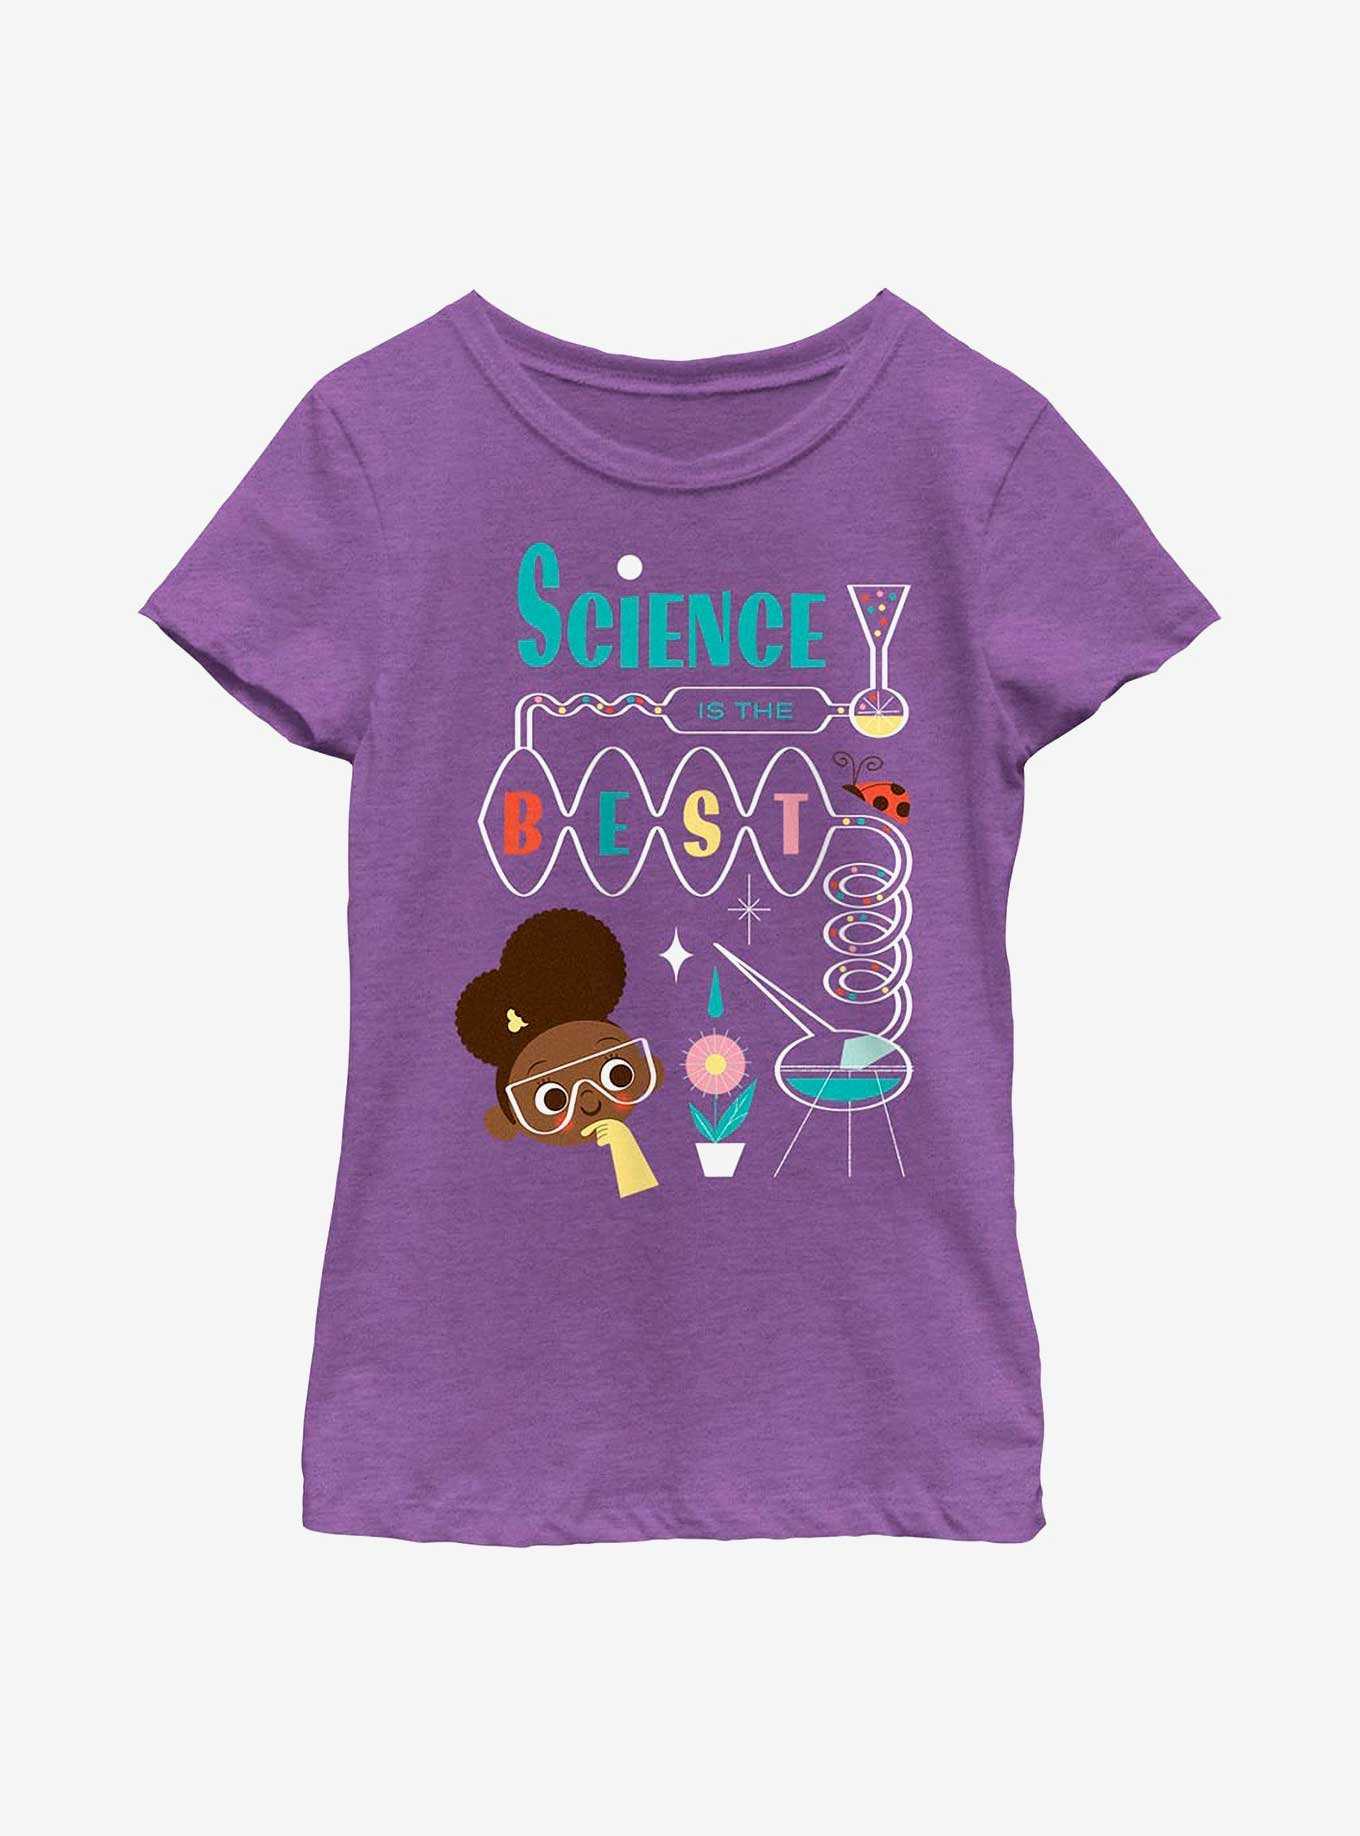 Ada Twist, Scientist Science Is The Best Titration Youth Girls T-Shirt, , hi-res